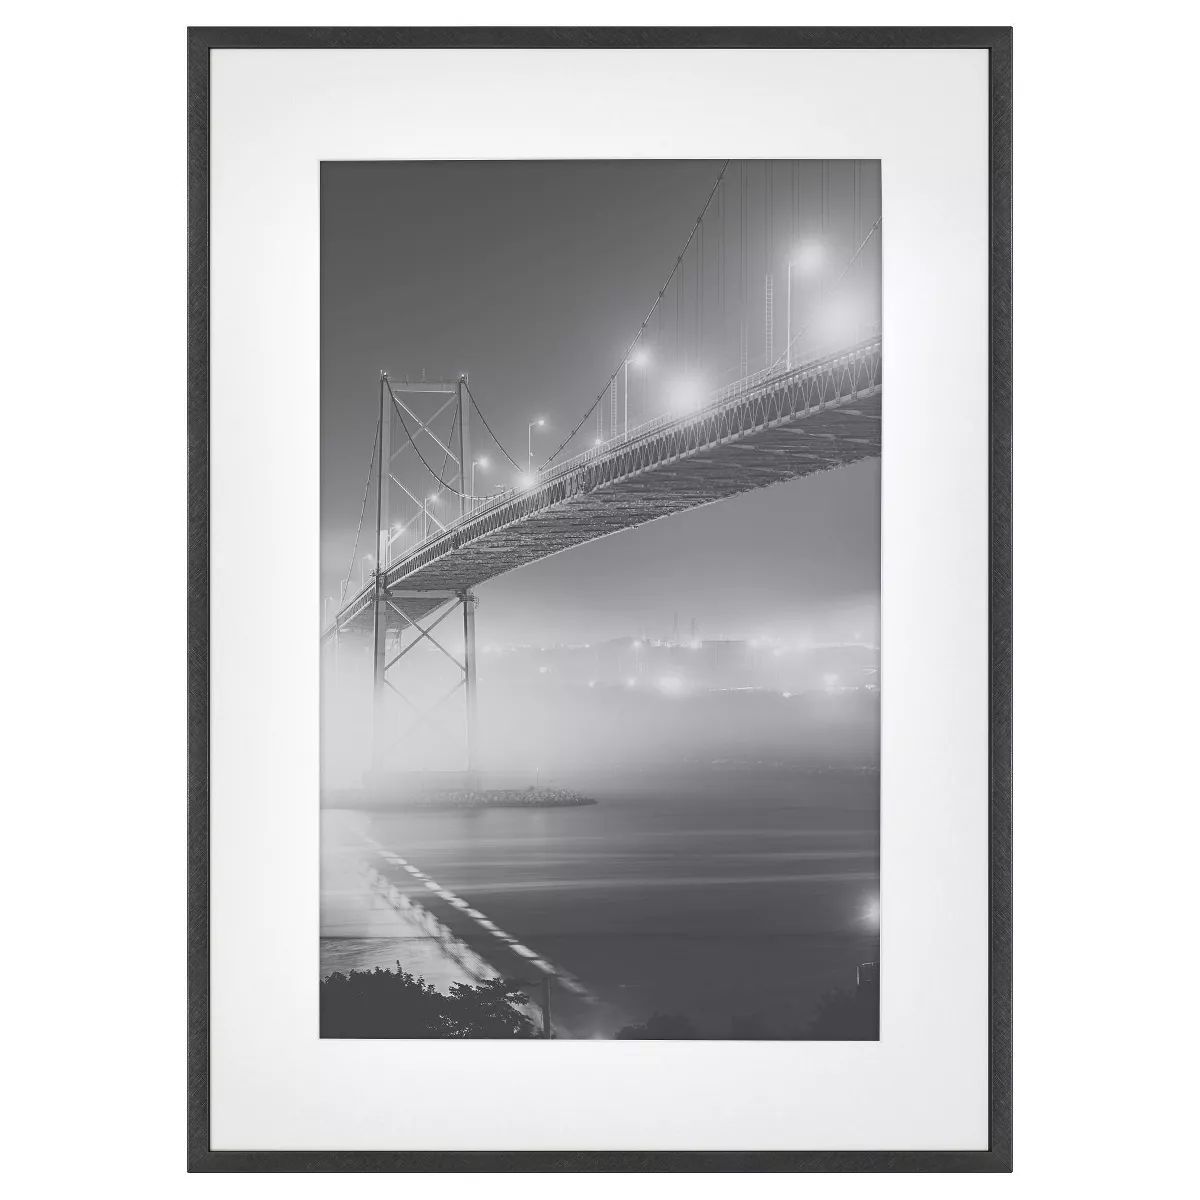 15.4" x 21.4" Matted to 11" x 17" Thin Metal Gallery Frame Black - Threshold™ | Target